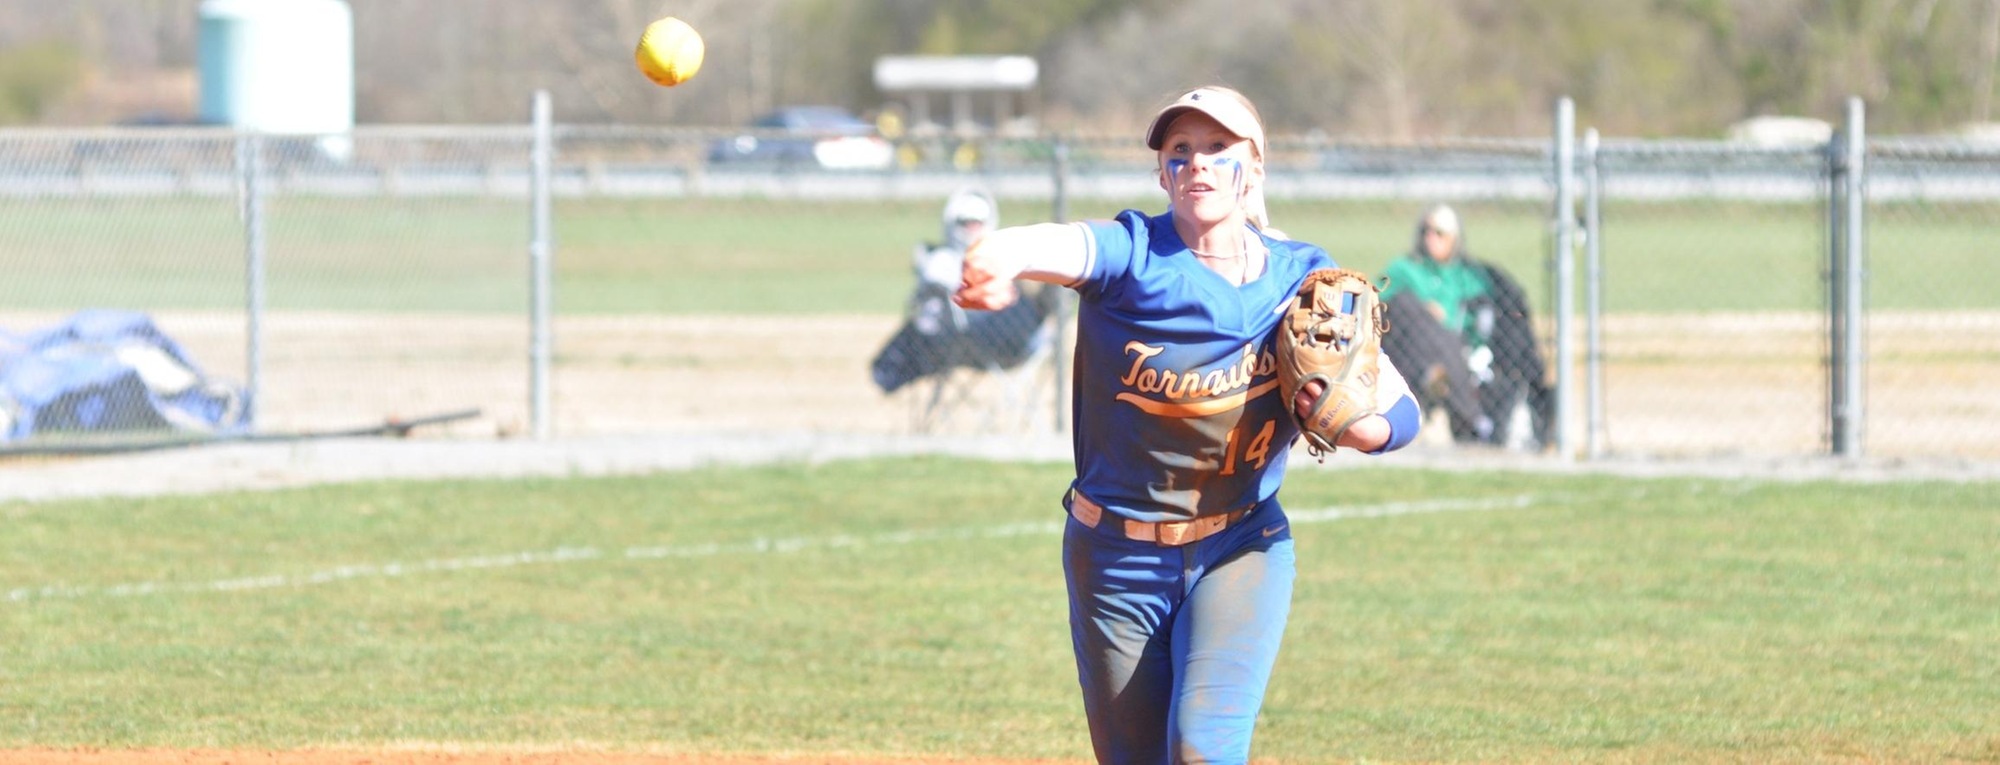 BC Softball Season Concludes with Doubleheader versus Monarchs